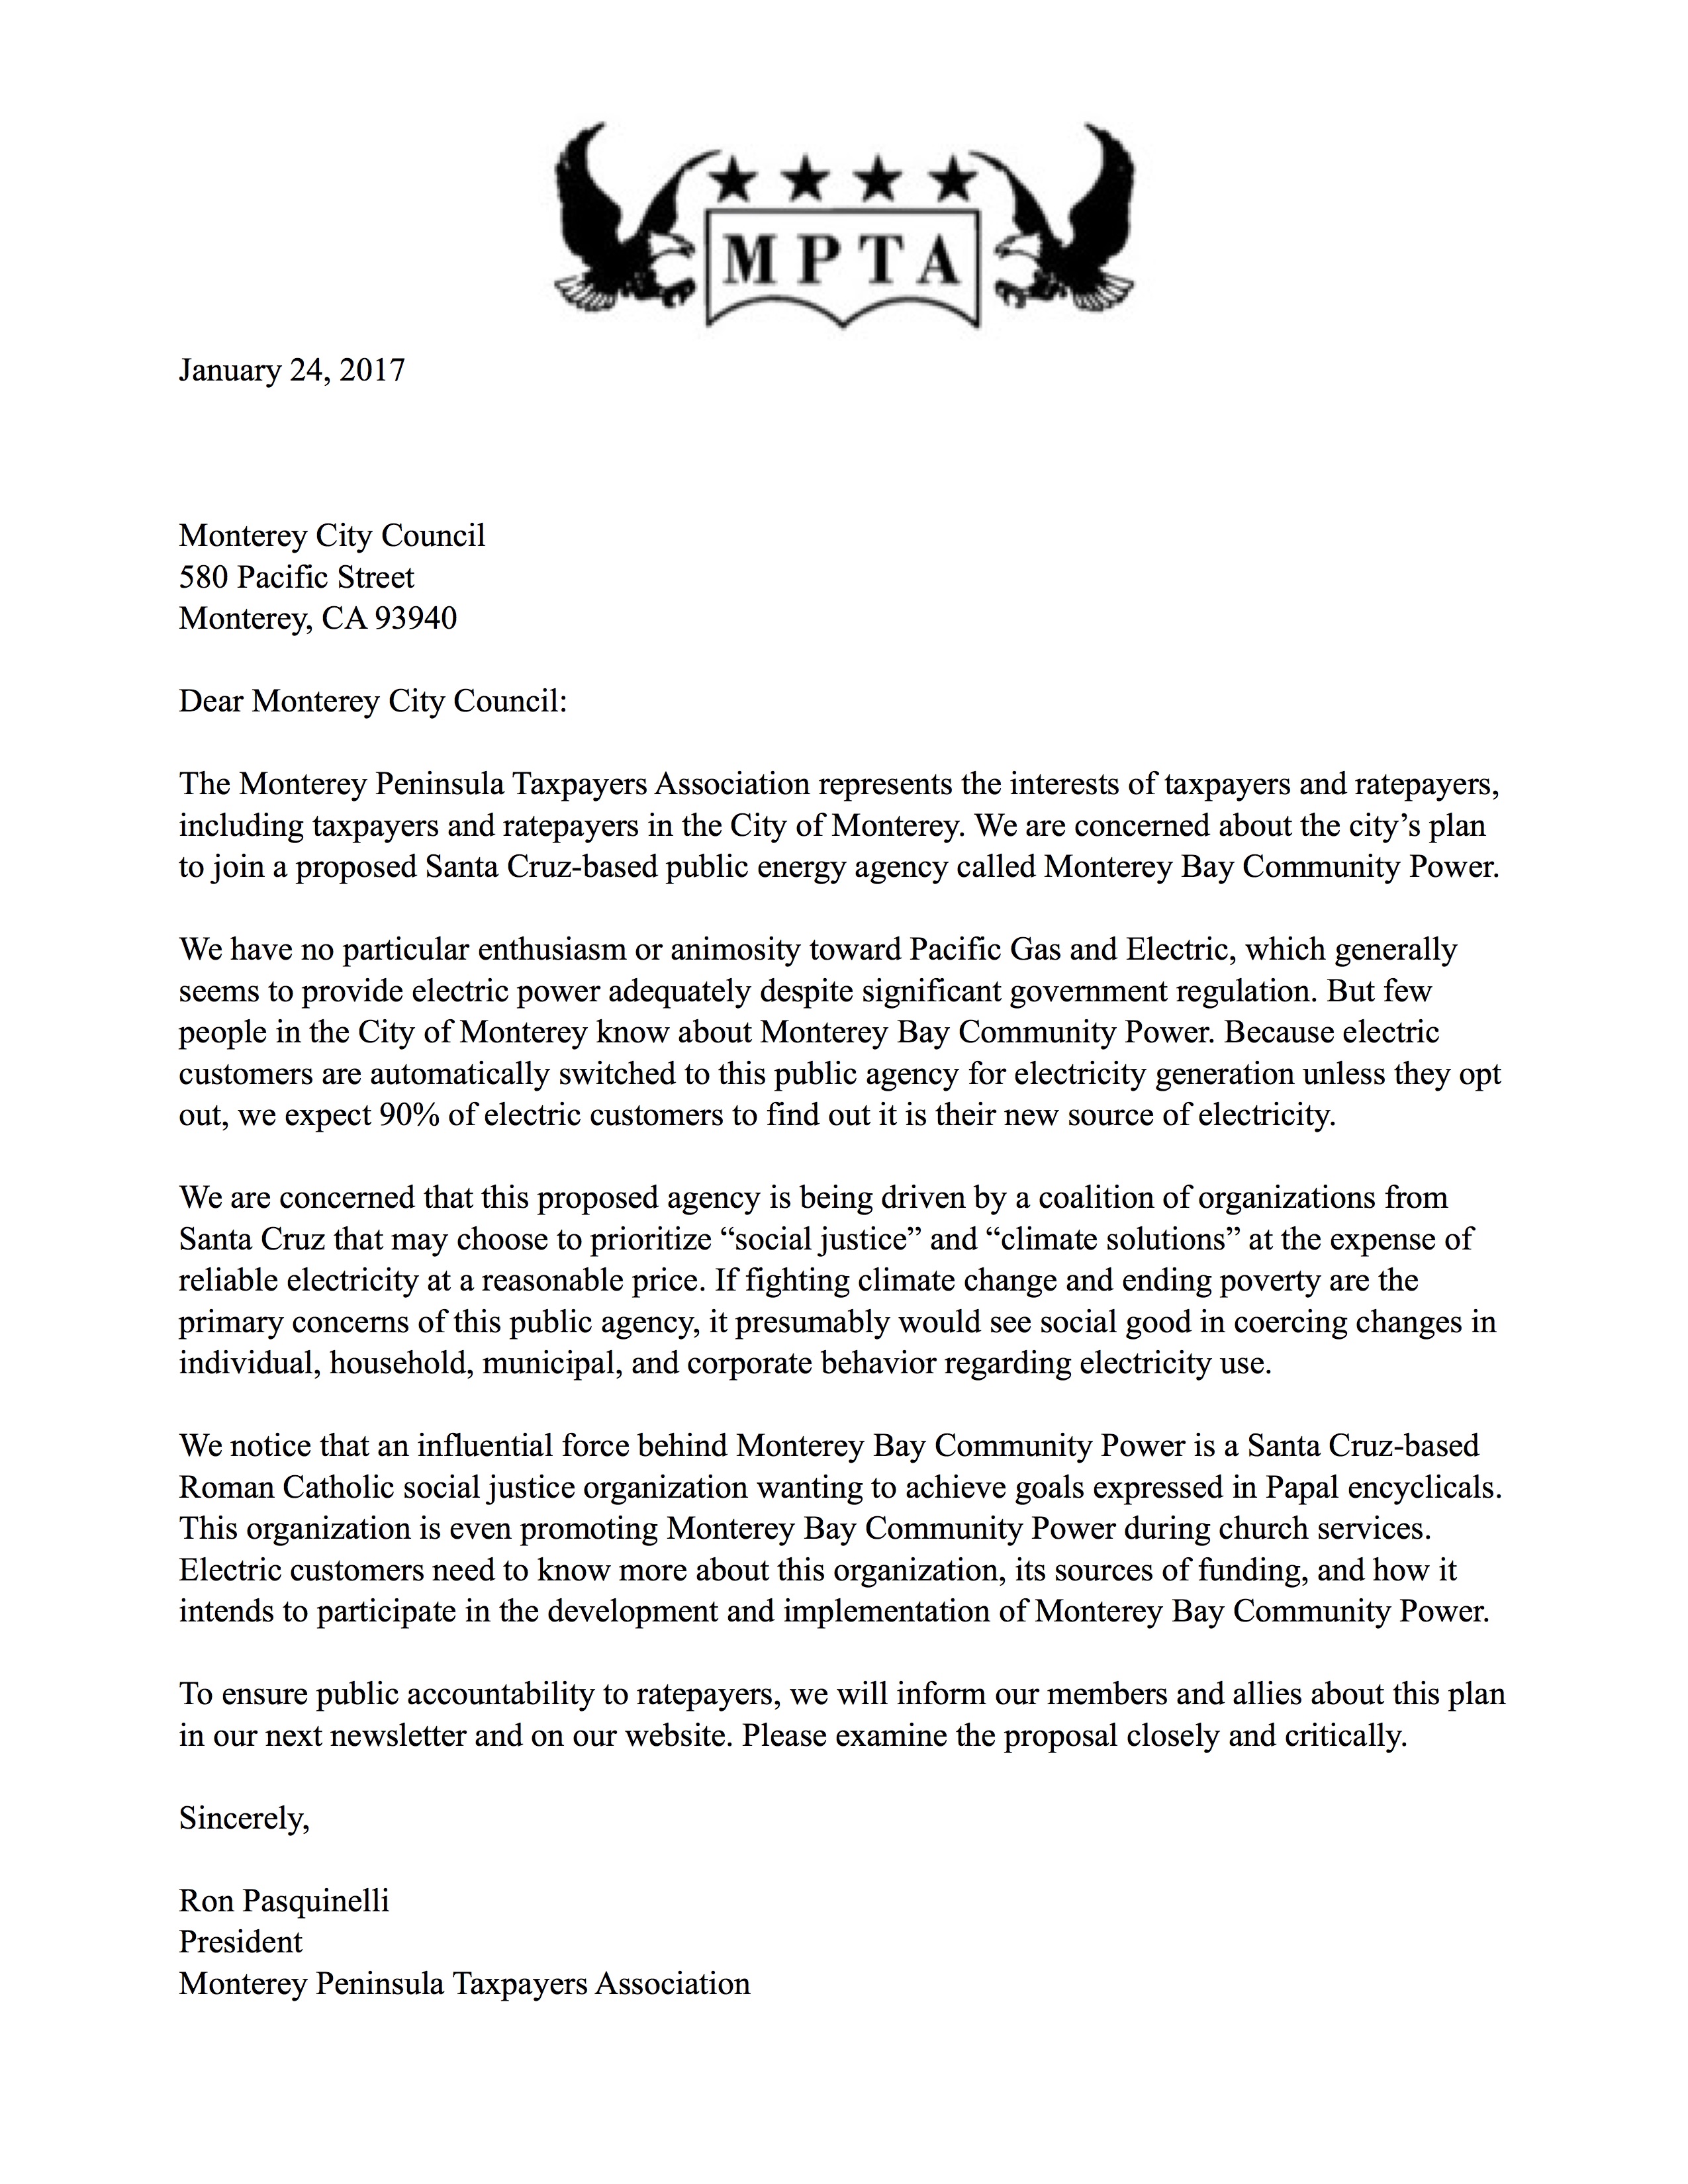 Letter to Monterey City Council from Monterey Peninsula Taxpayers Association on Community Choice Aggregation - January 24 2017